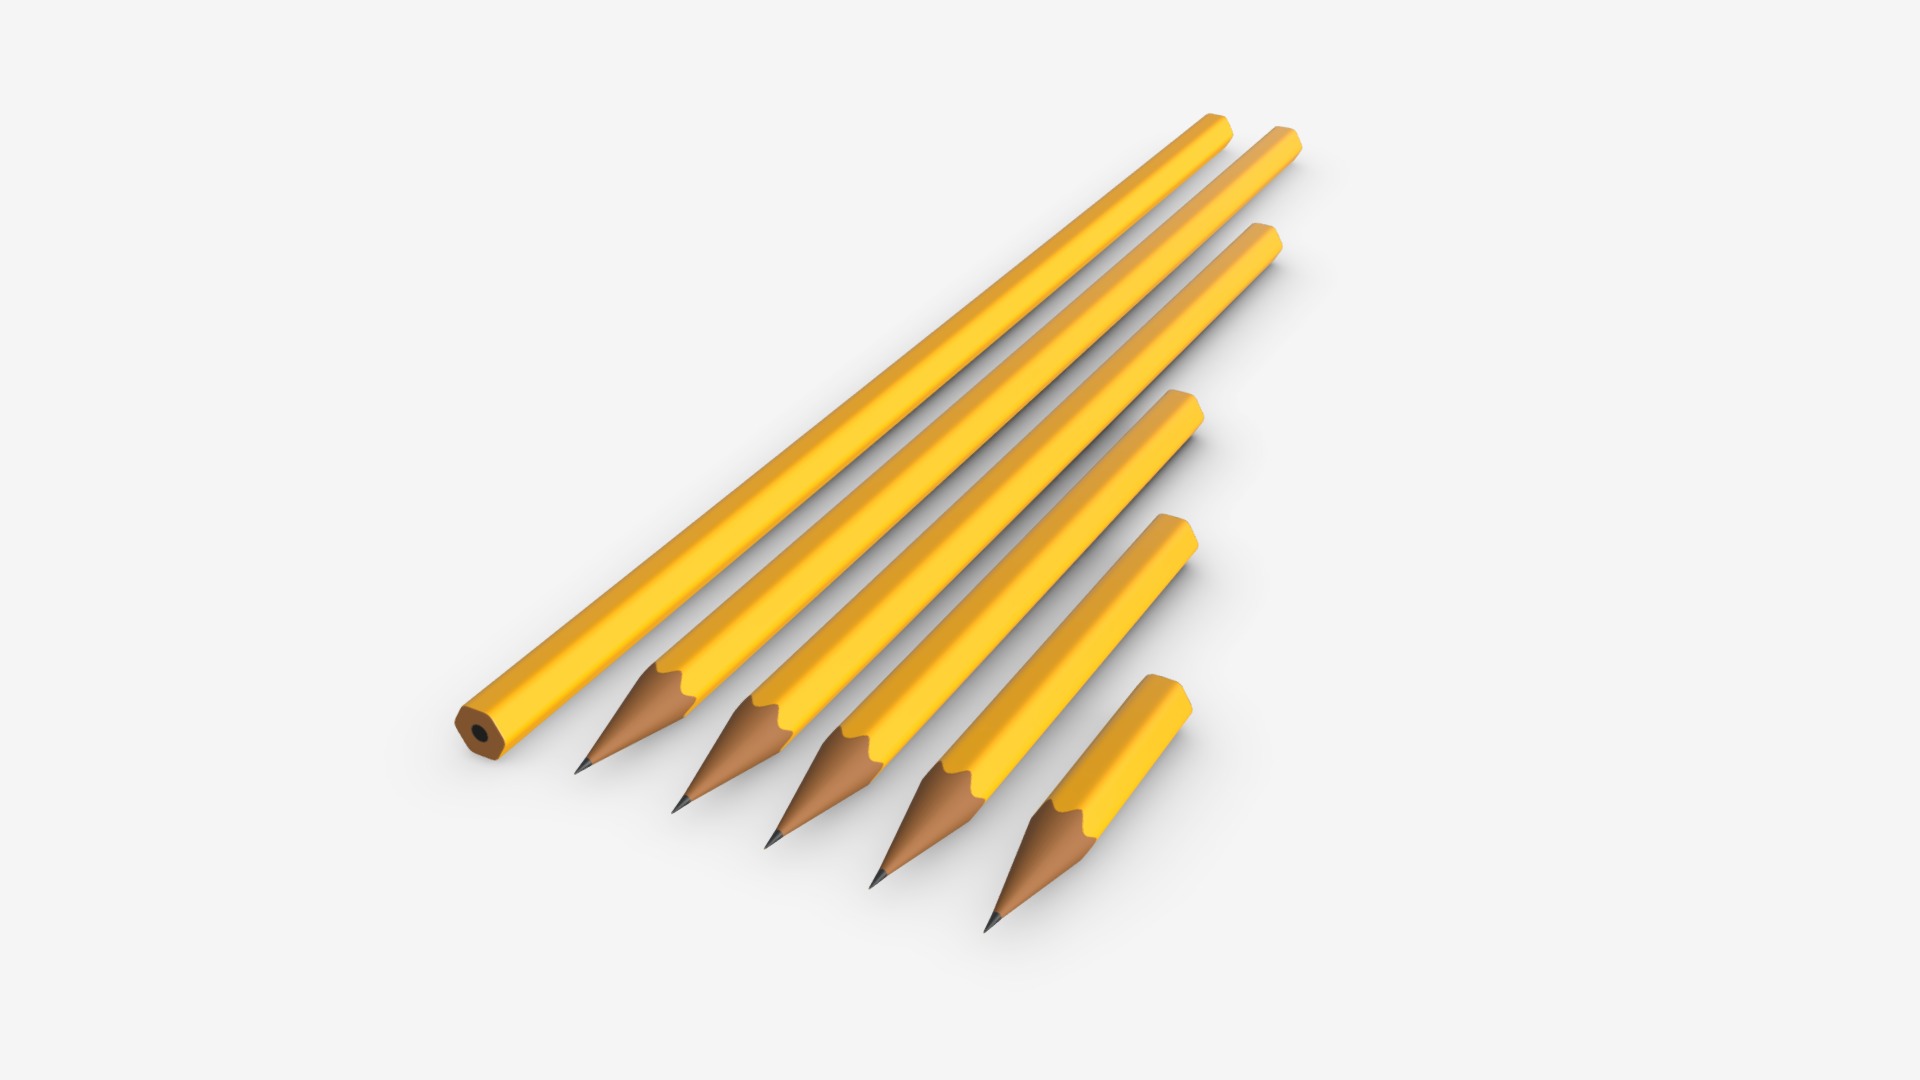 3D model Pencils various sizes - This is a 3D model of the Pencils various sizes. The 3D model is about a group of yellow pencils.